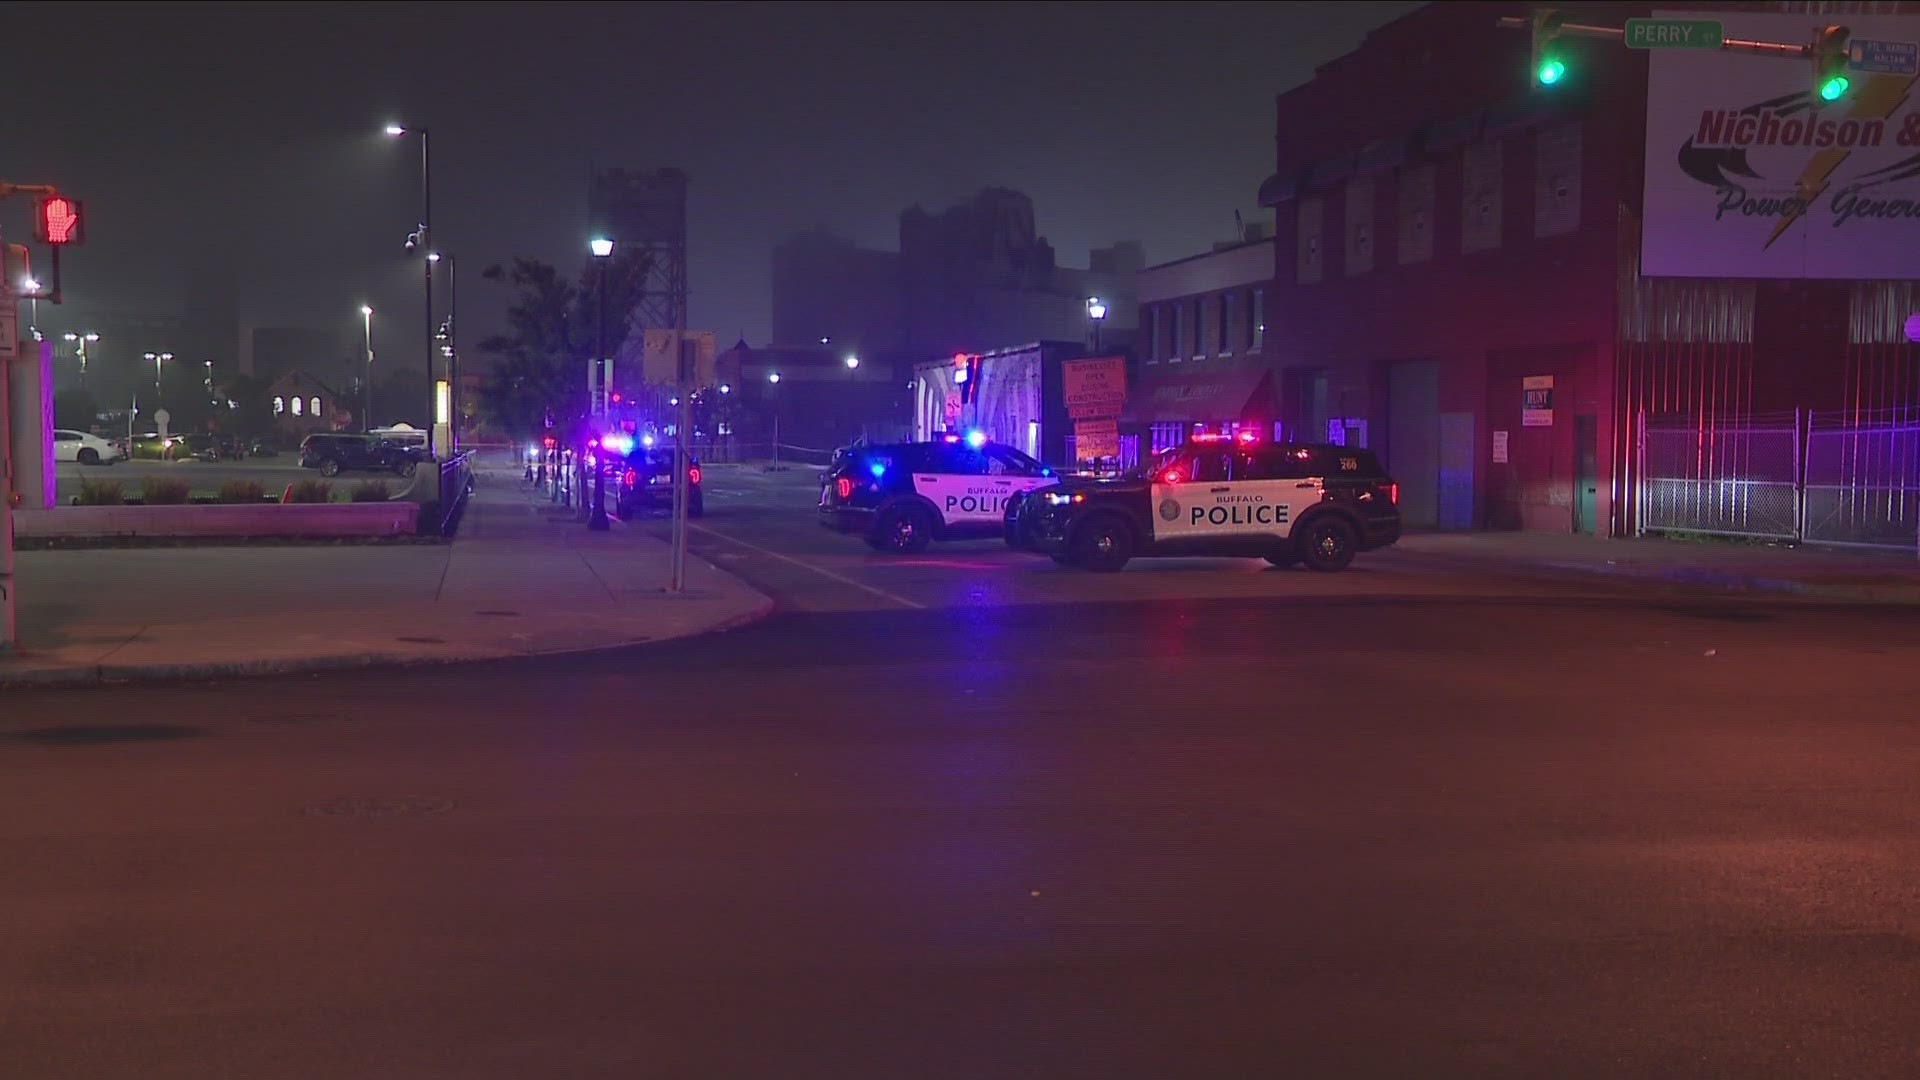 Detectives say two people, a 35-year-old male and a 26-year-old female, were shot while they were on the sidewalk.